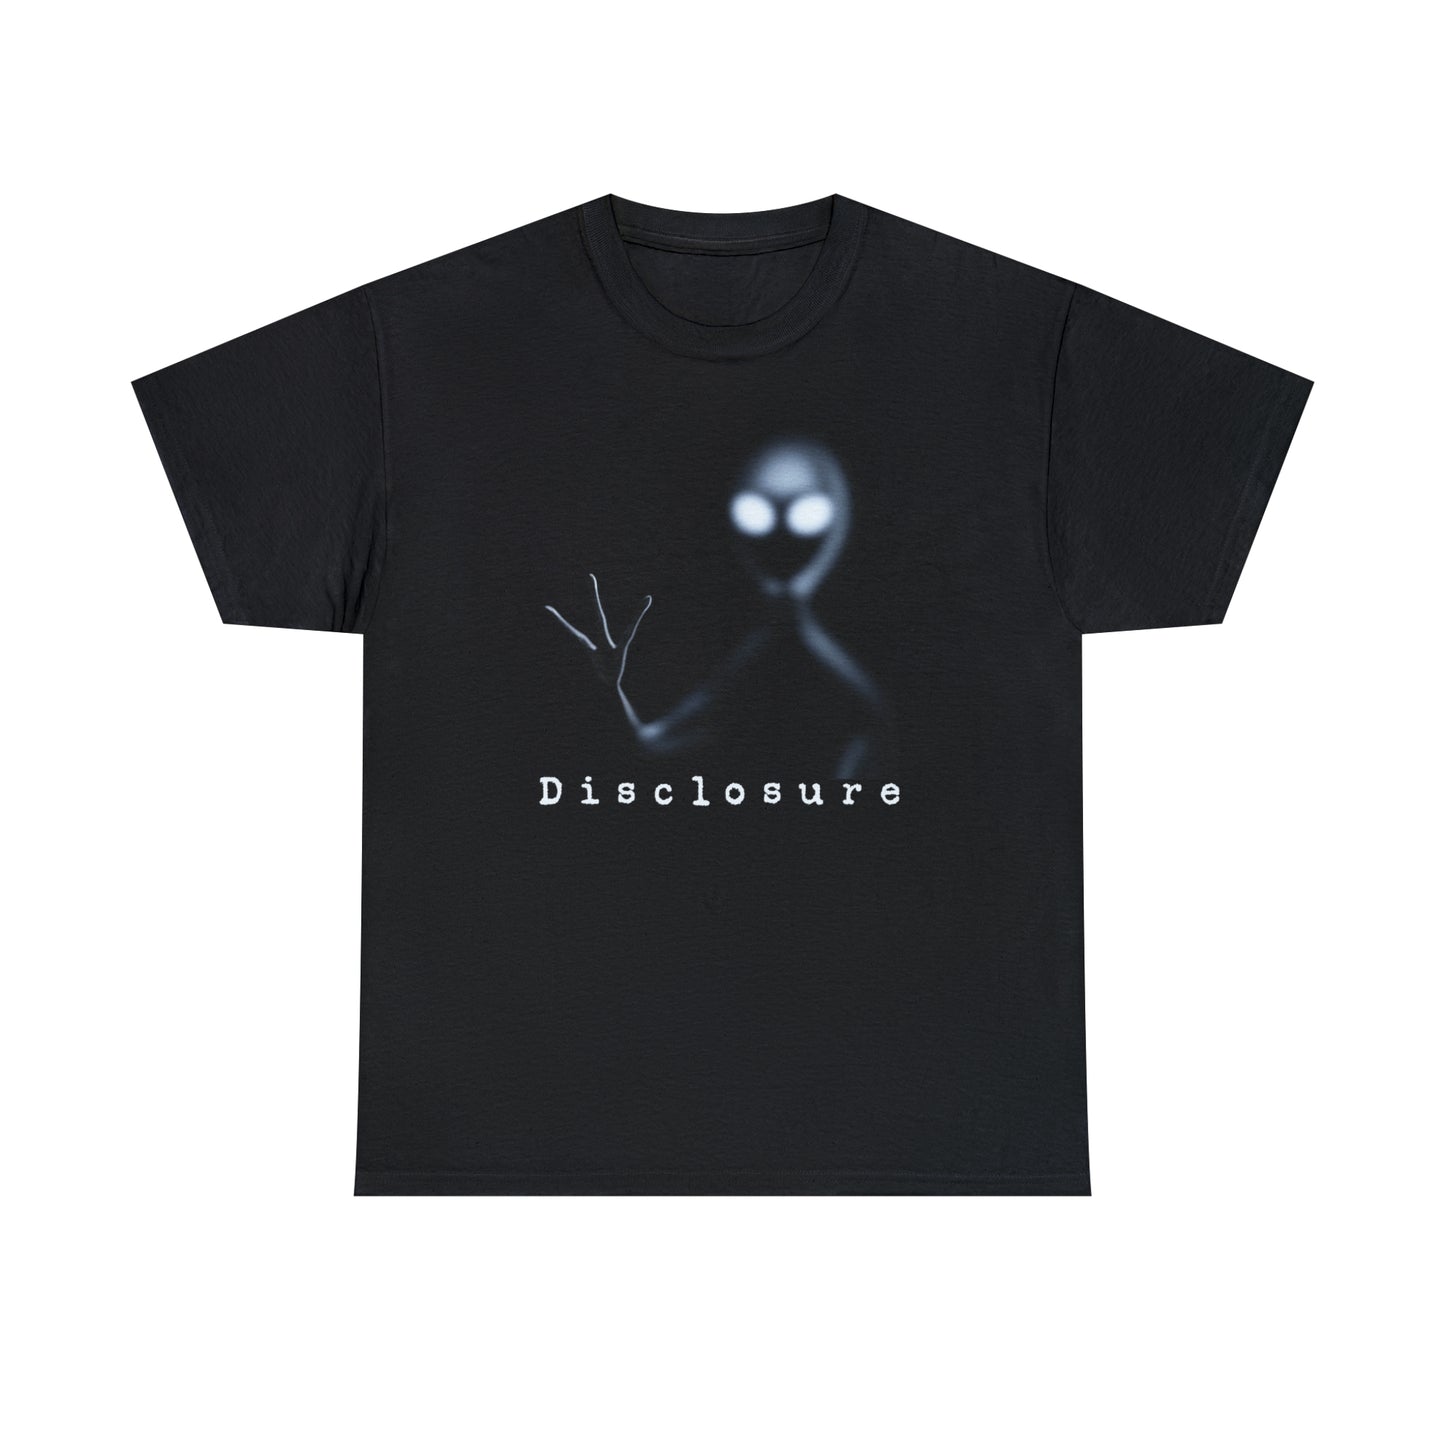 Alien T-Shirt For Disclosure TShirt For Ancient Alien TShirt For Extraterrestrial Shirt For Spaceman Tee For Outer Space T-Shirt